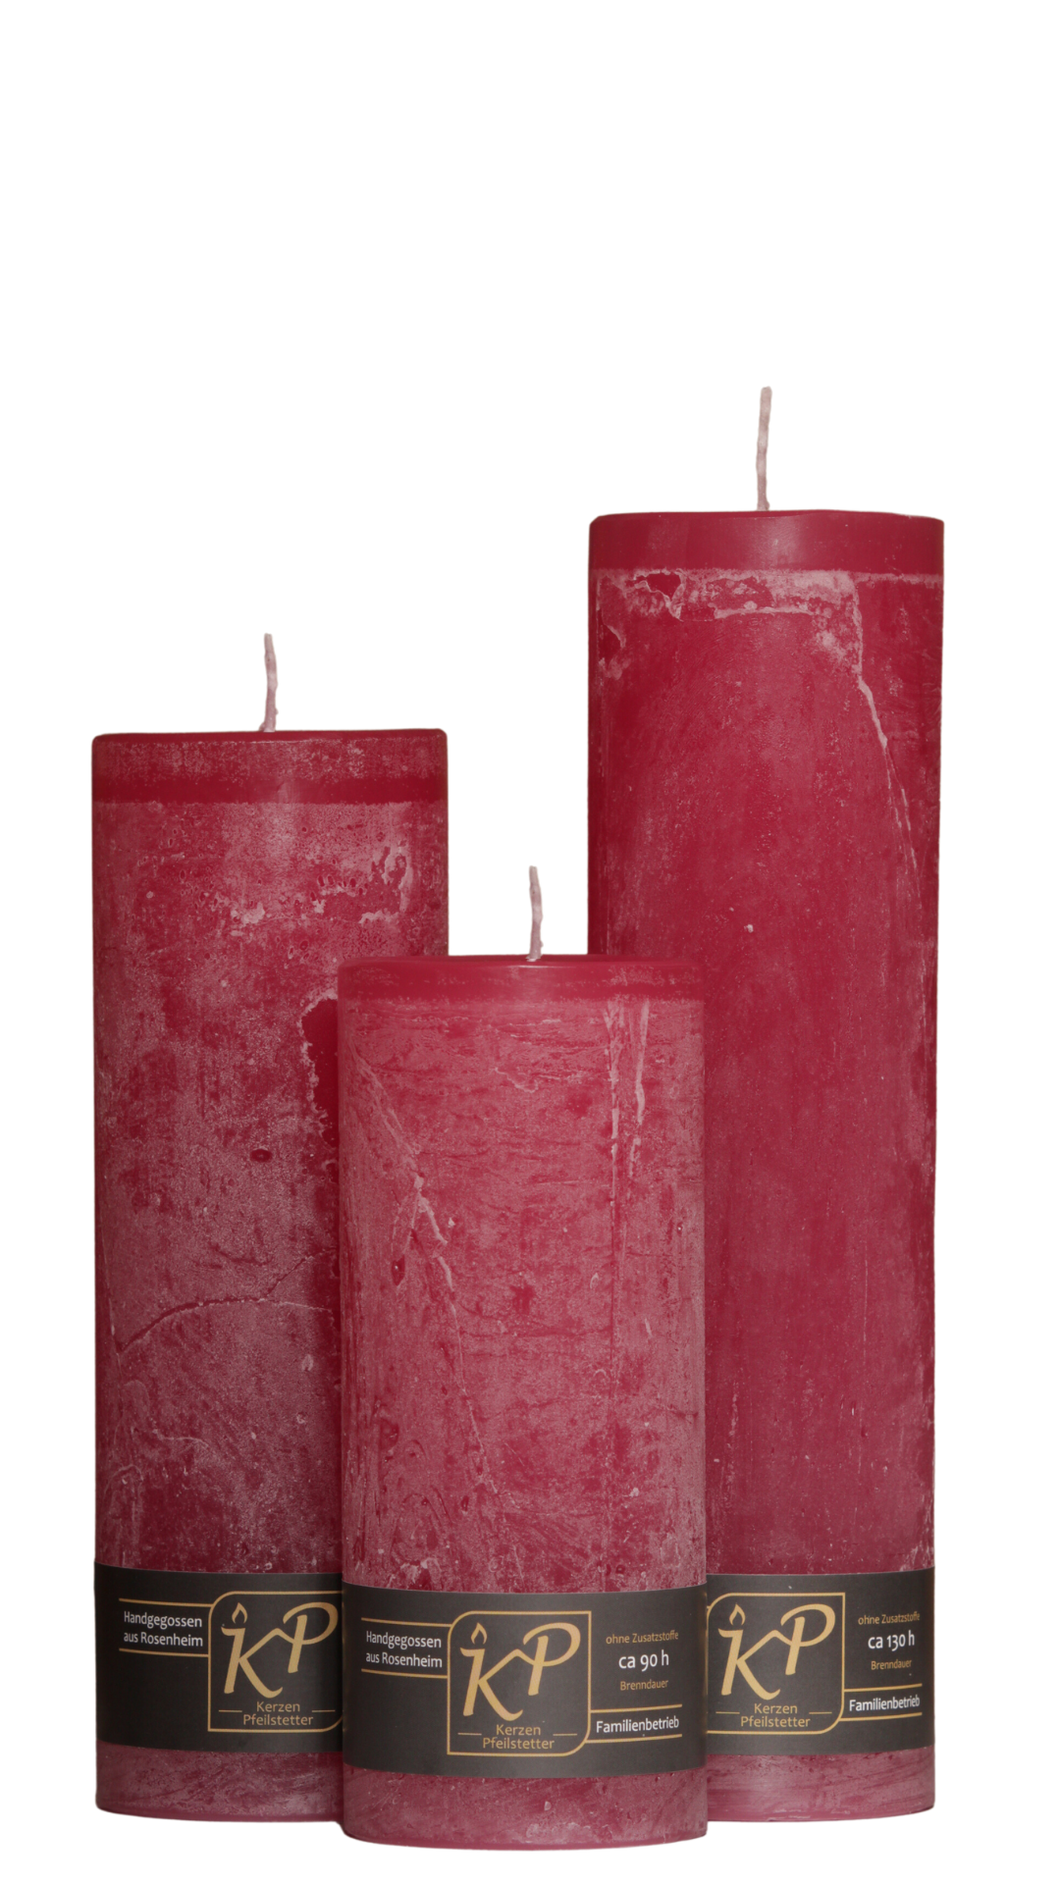 Dalina flower candle | raspberry pink | ~ 130h burning time